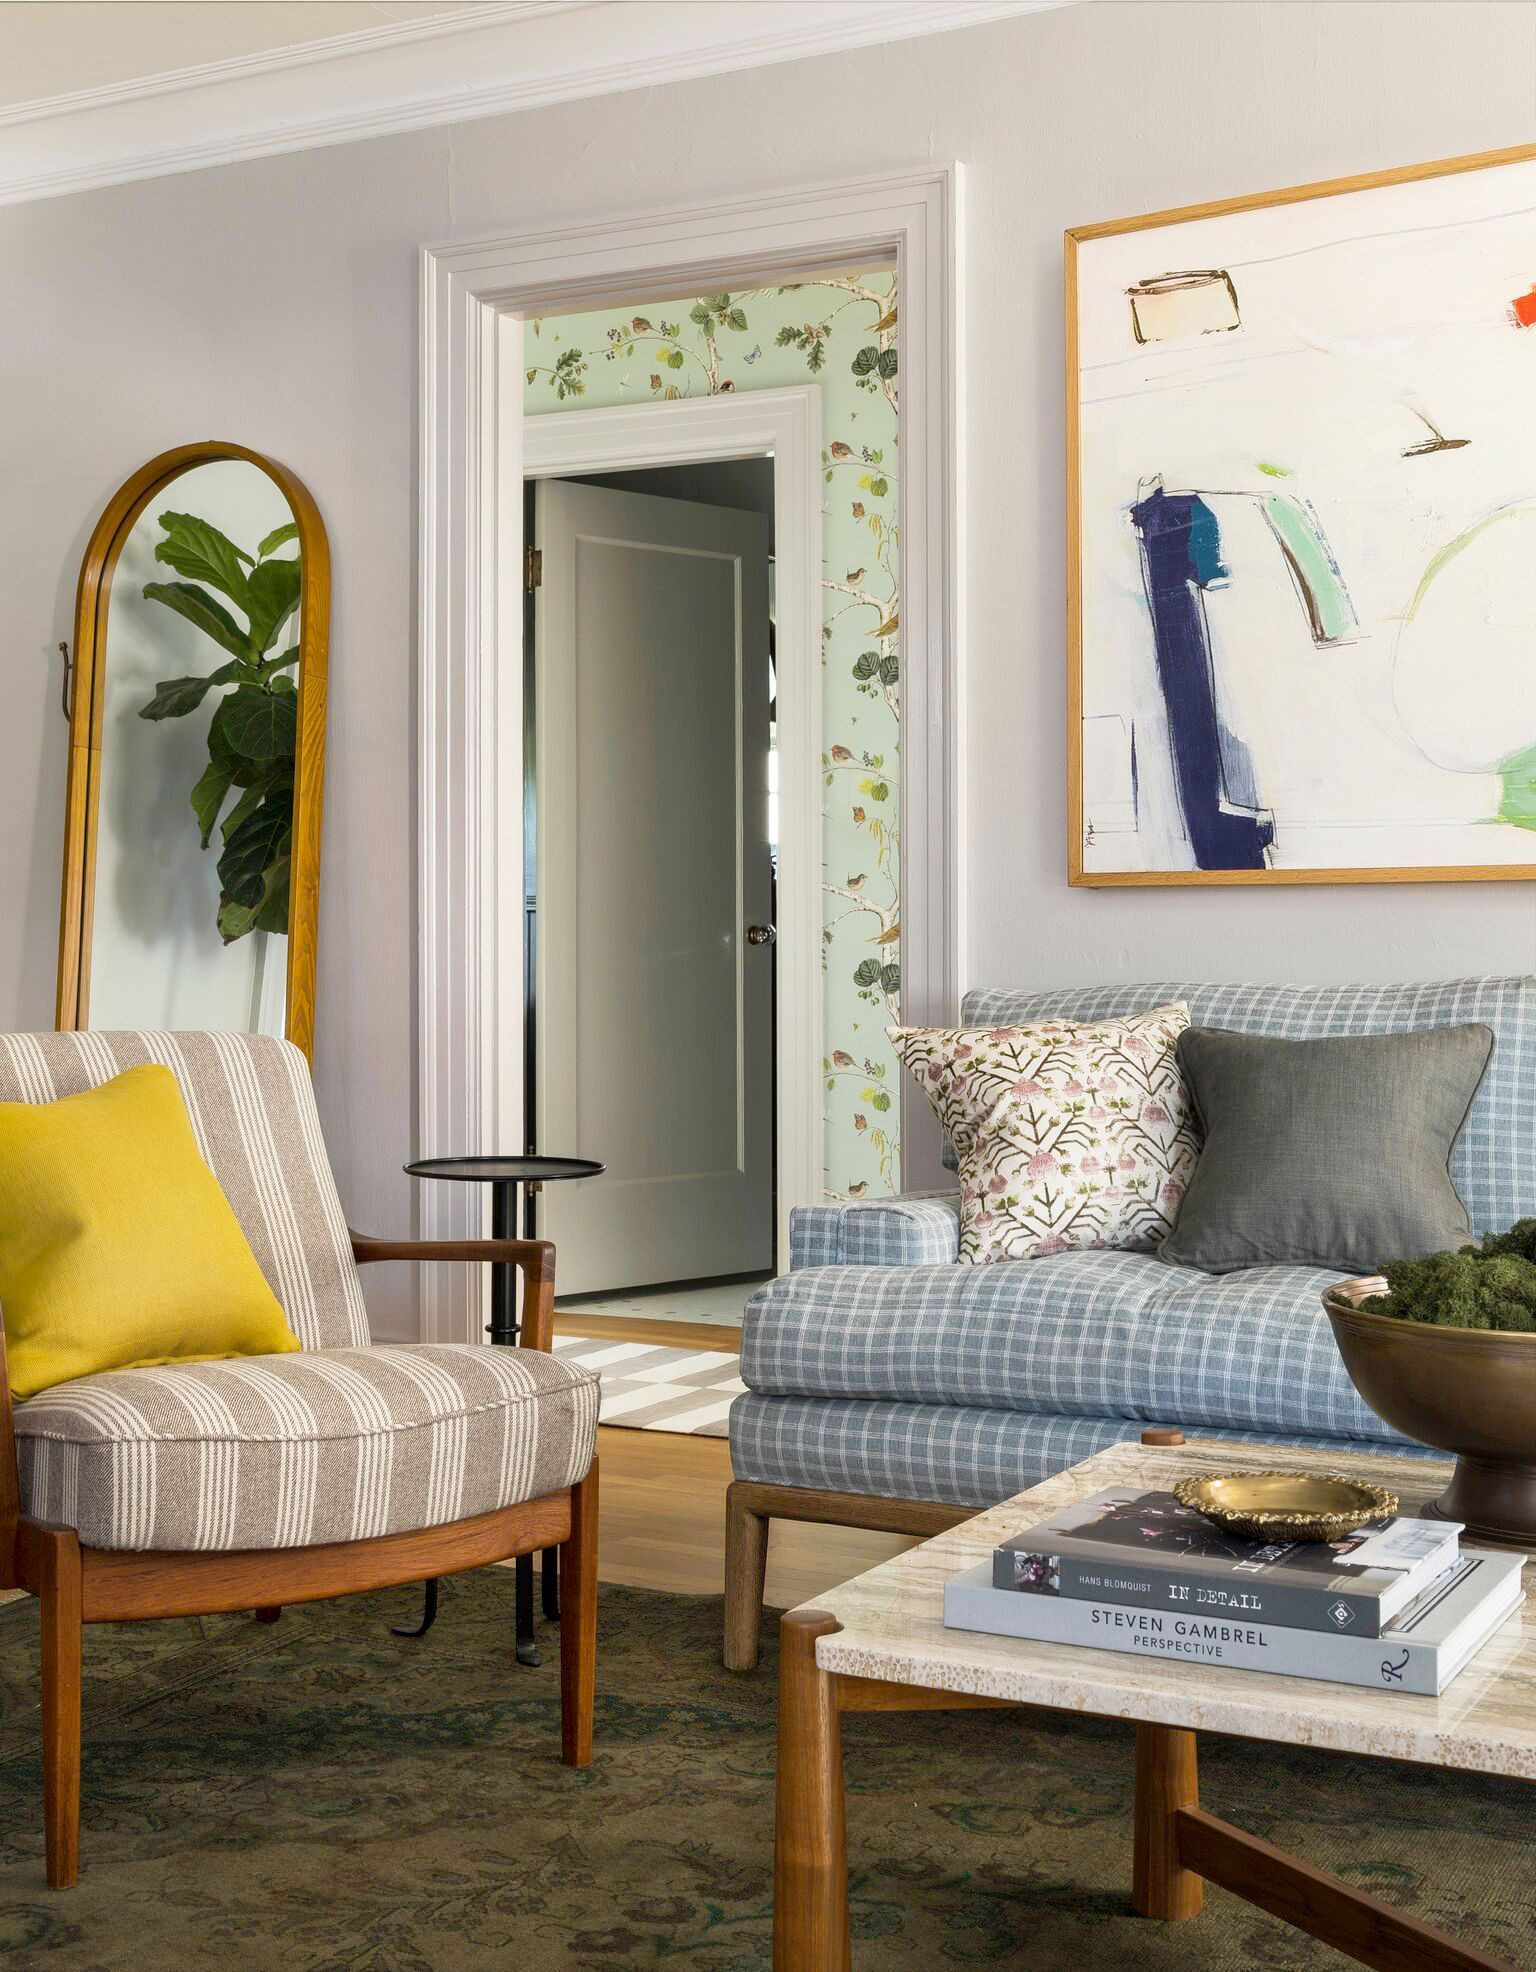 Best Color For Living Room
 We Ranked the 30 Best Colors to Paint Your Living Room in